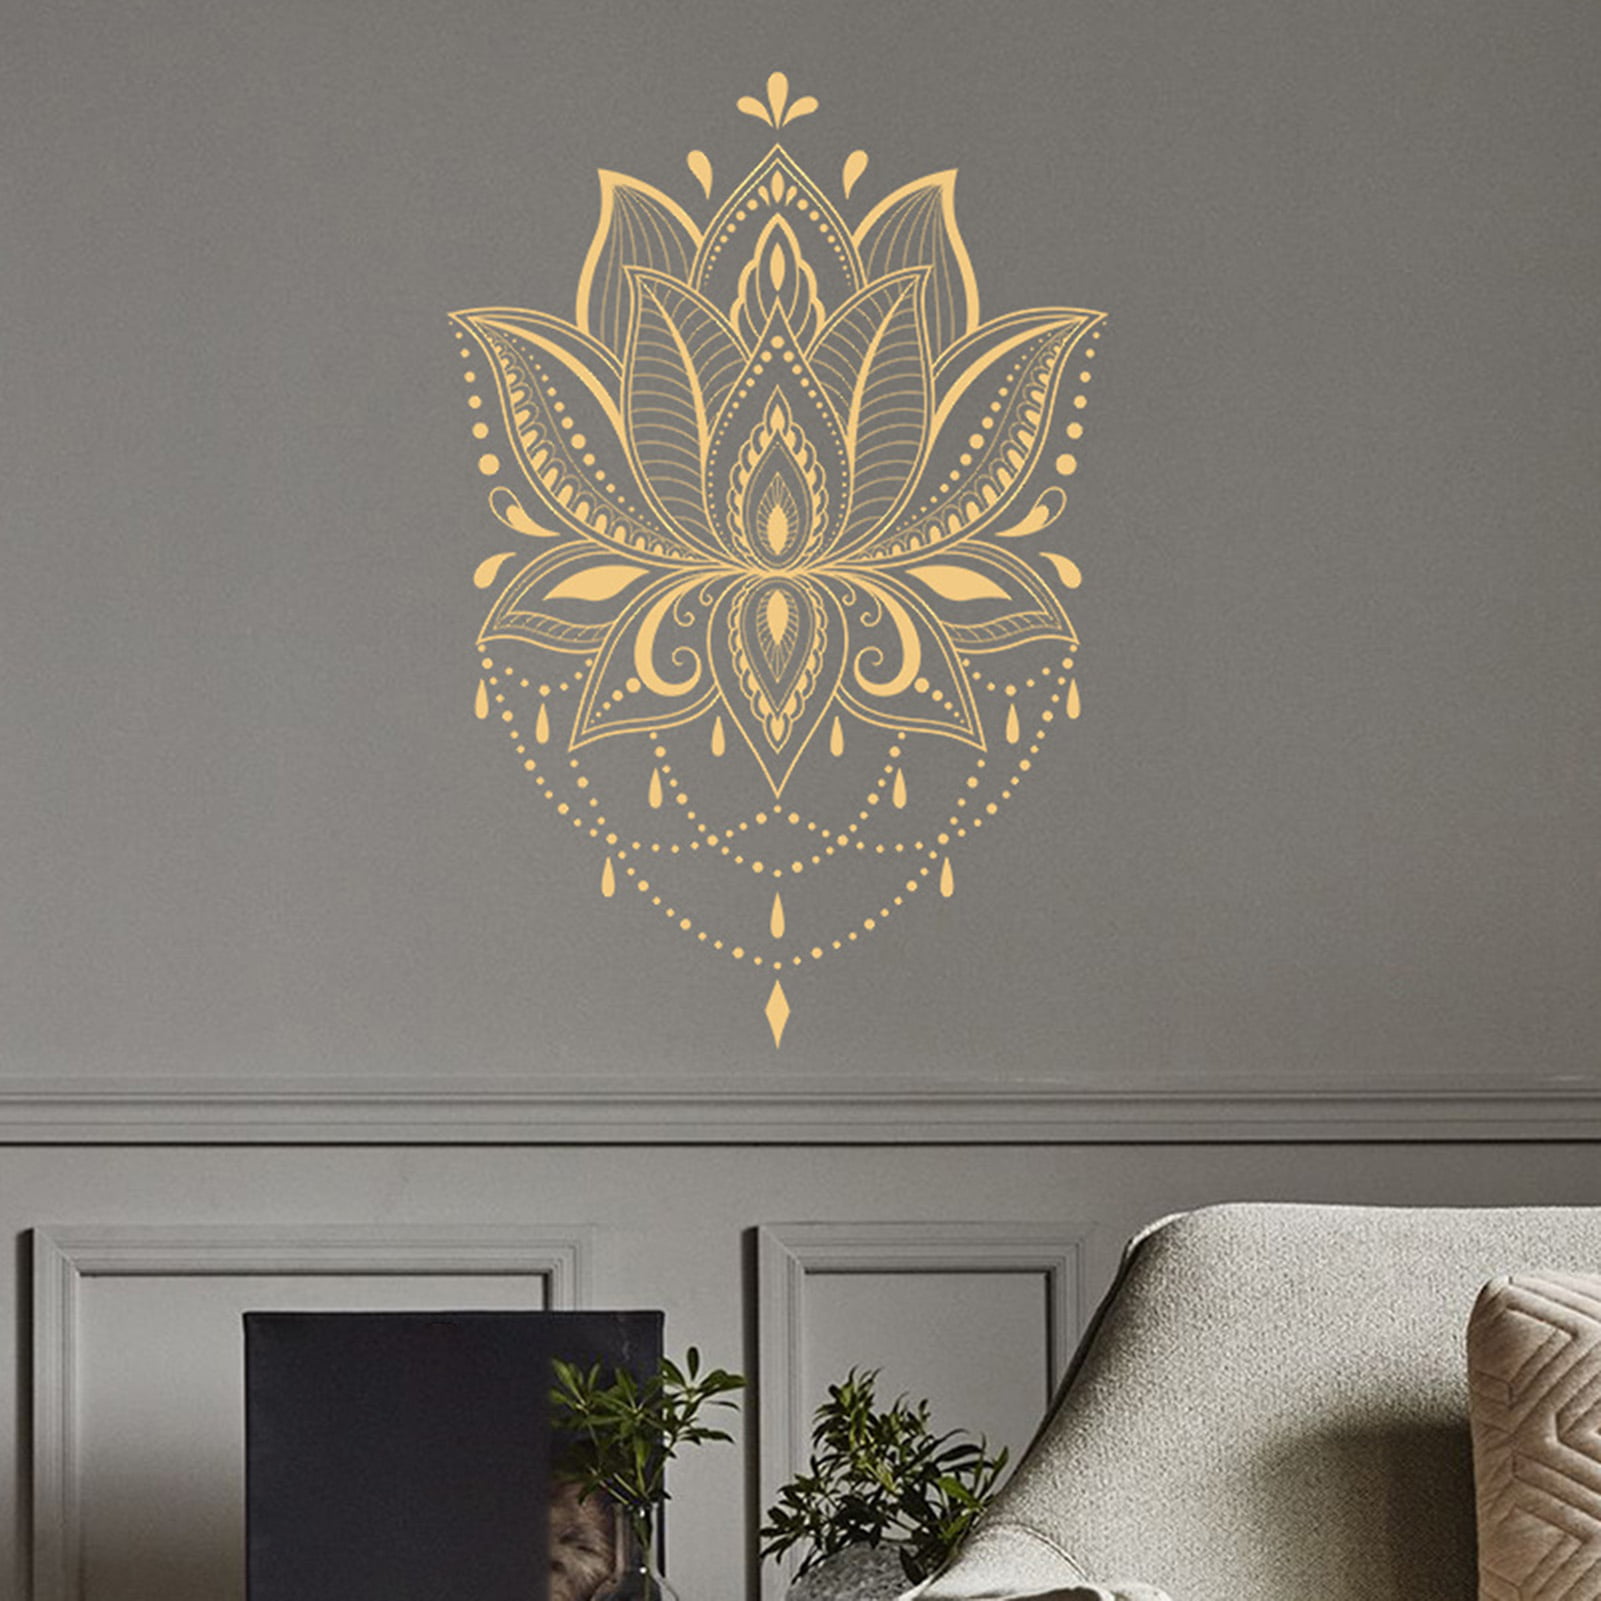 Quality Hand Made Details about   Medium Lotus Bathroom Wall Decal More Colors